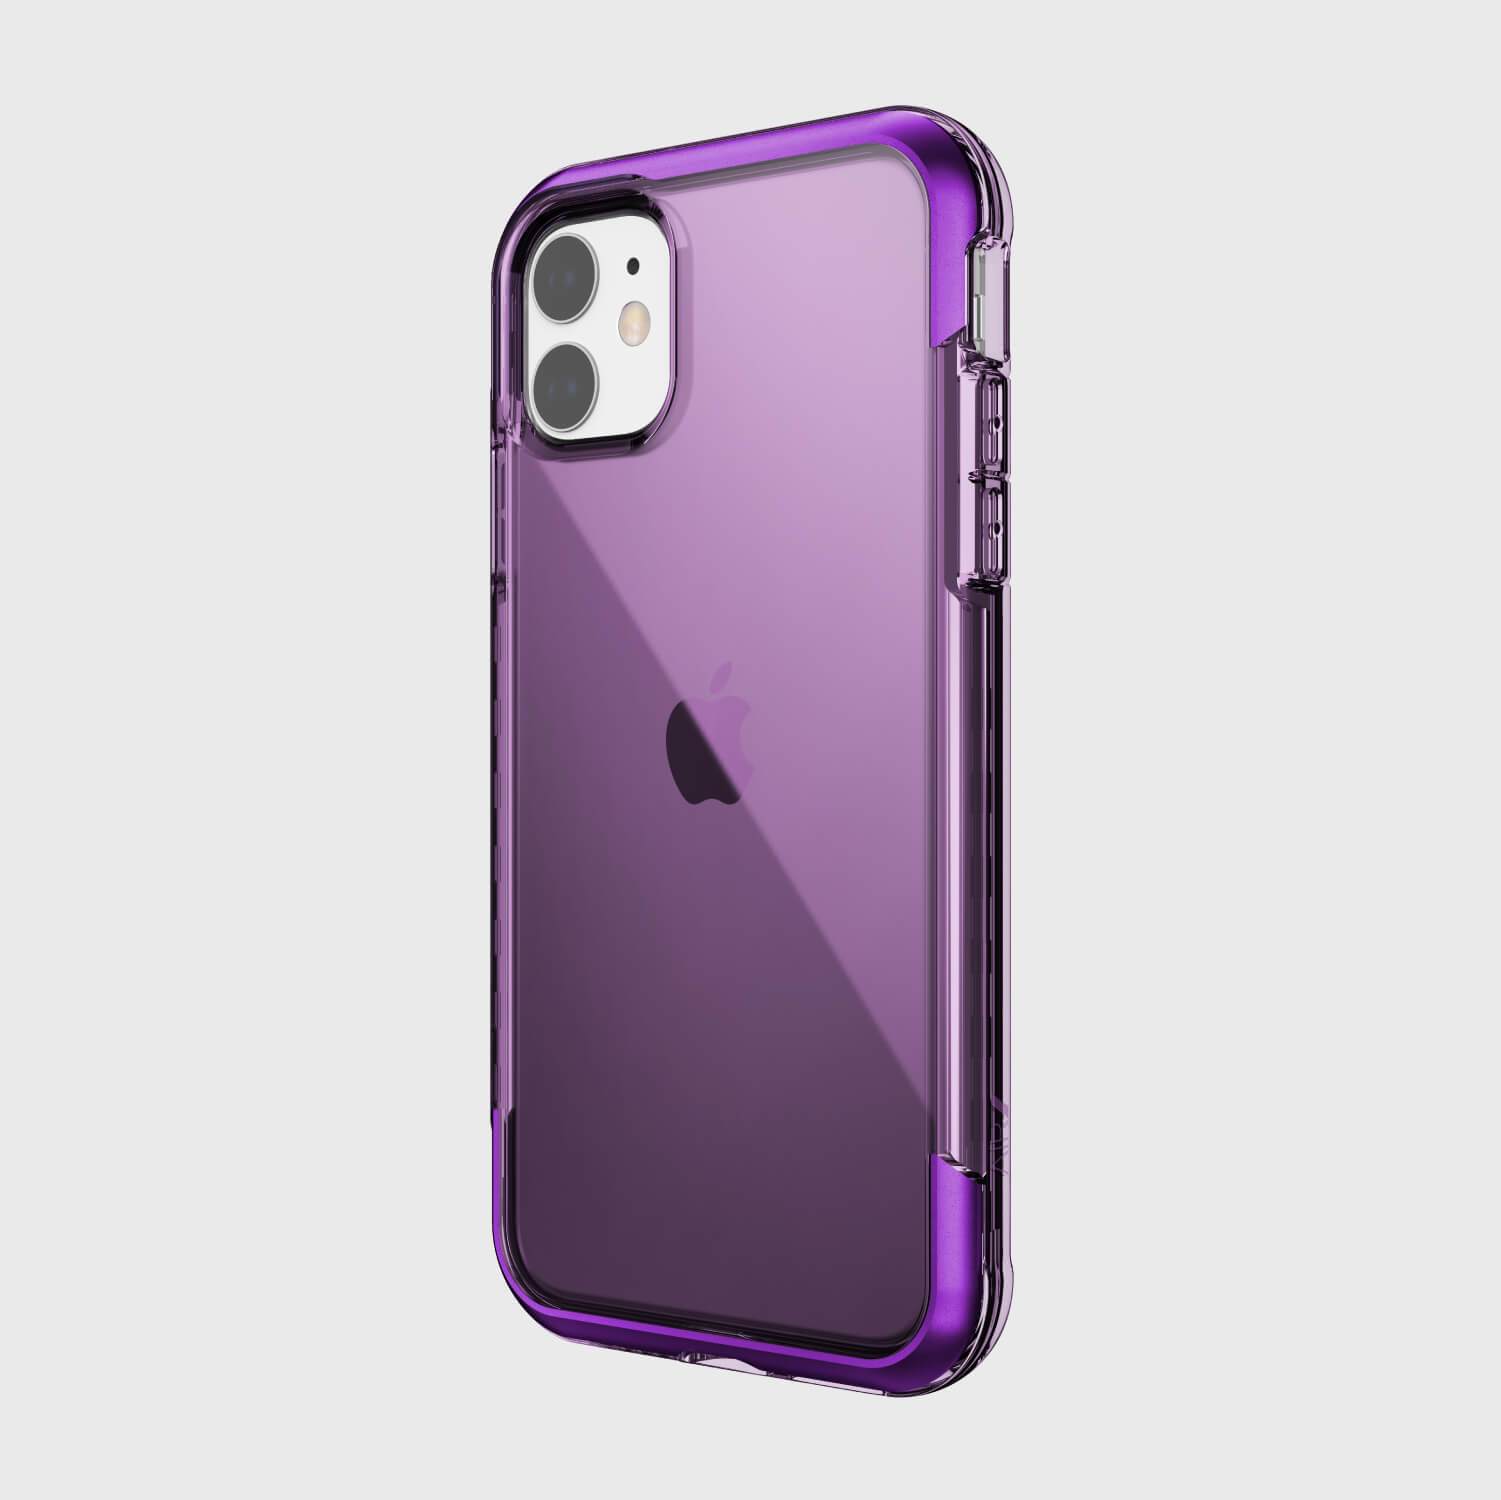 The Raptic Air iPhone 11 Case is shown on a white background.